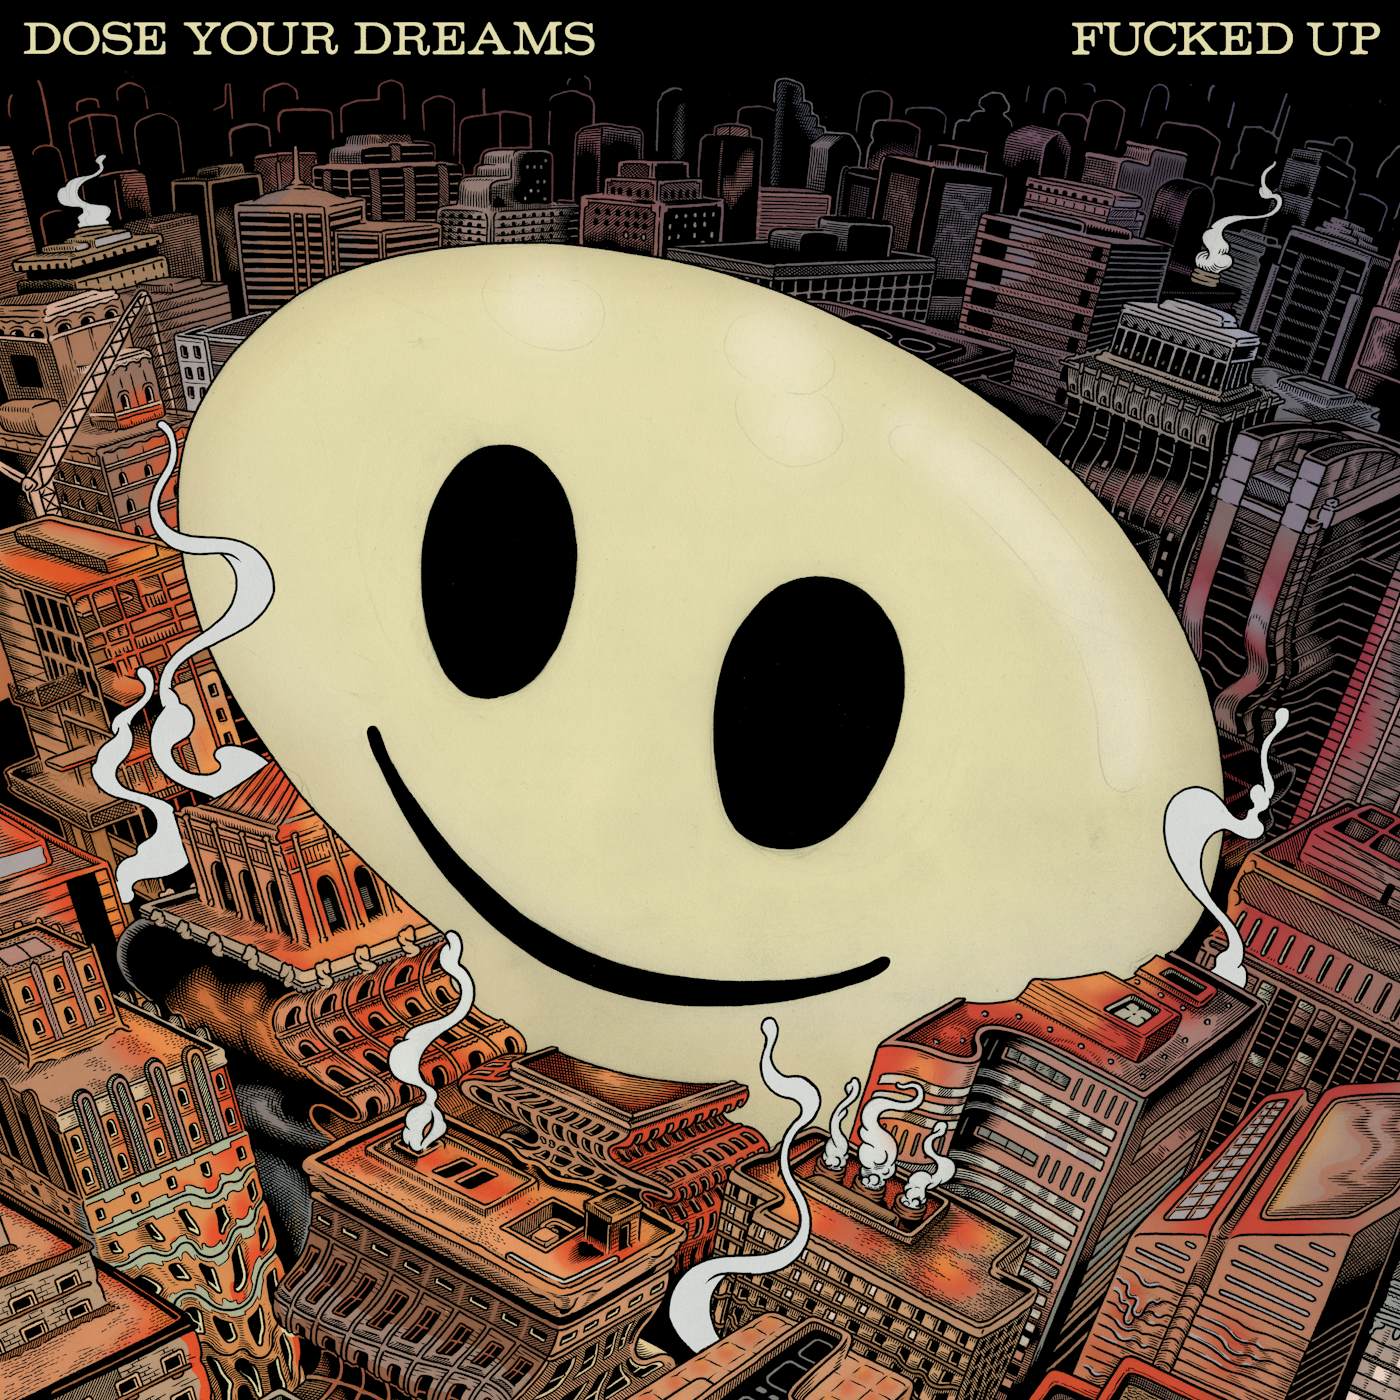 Fucked Up DOSE YOUR DREAMS CD